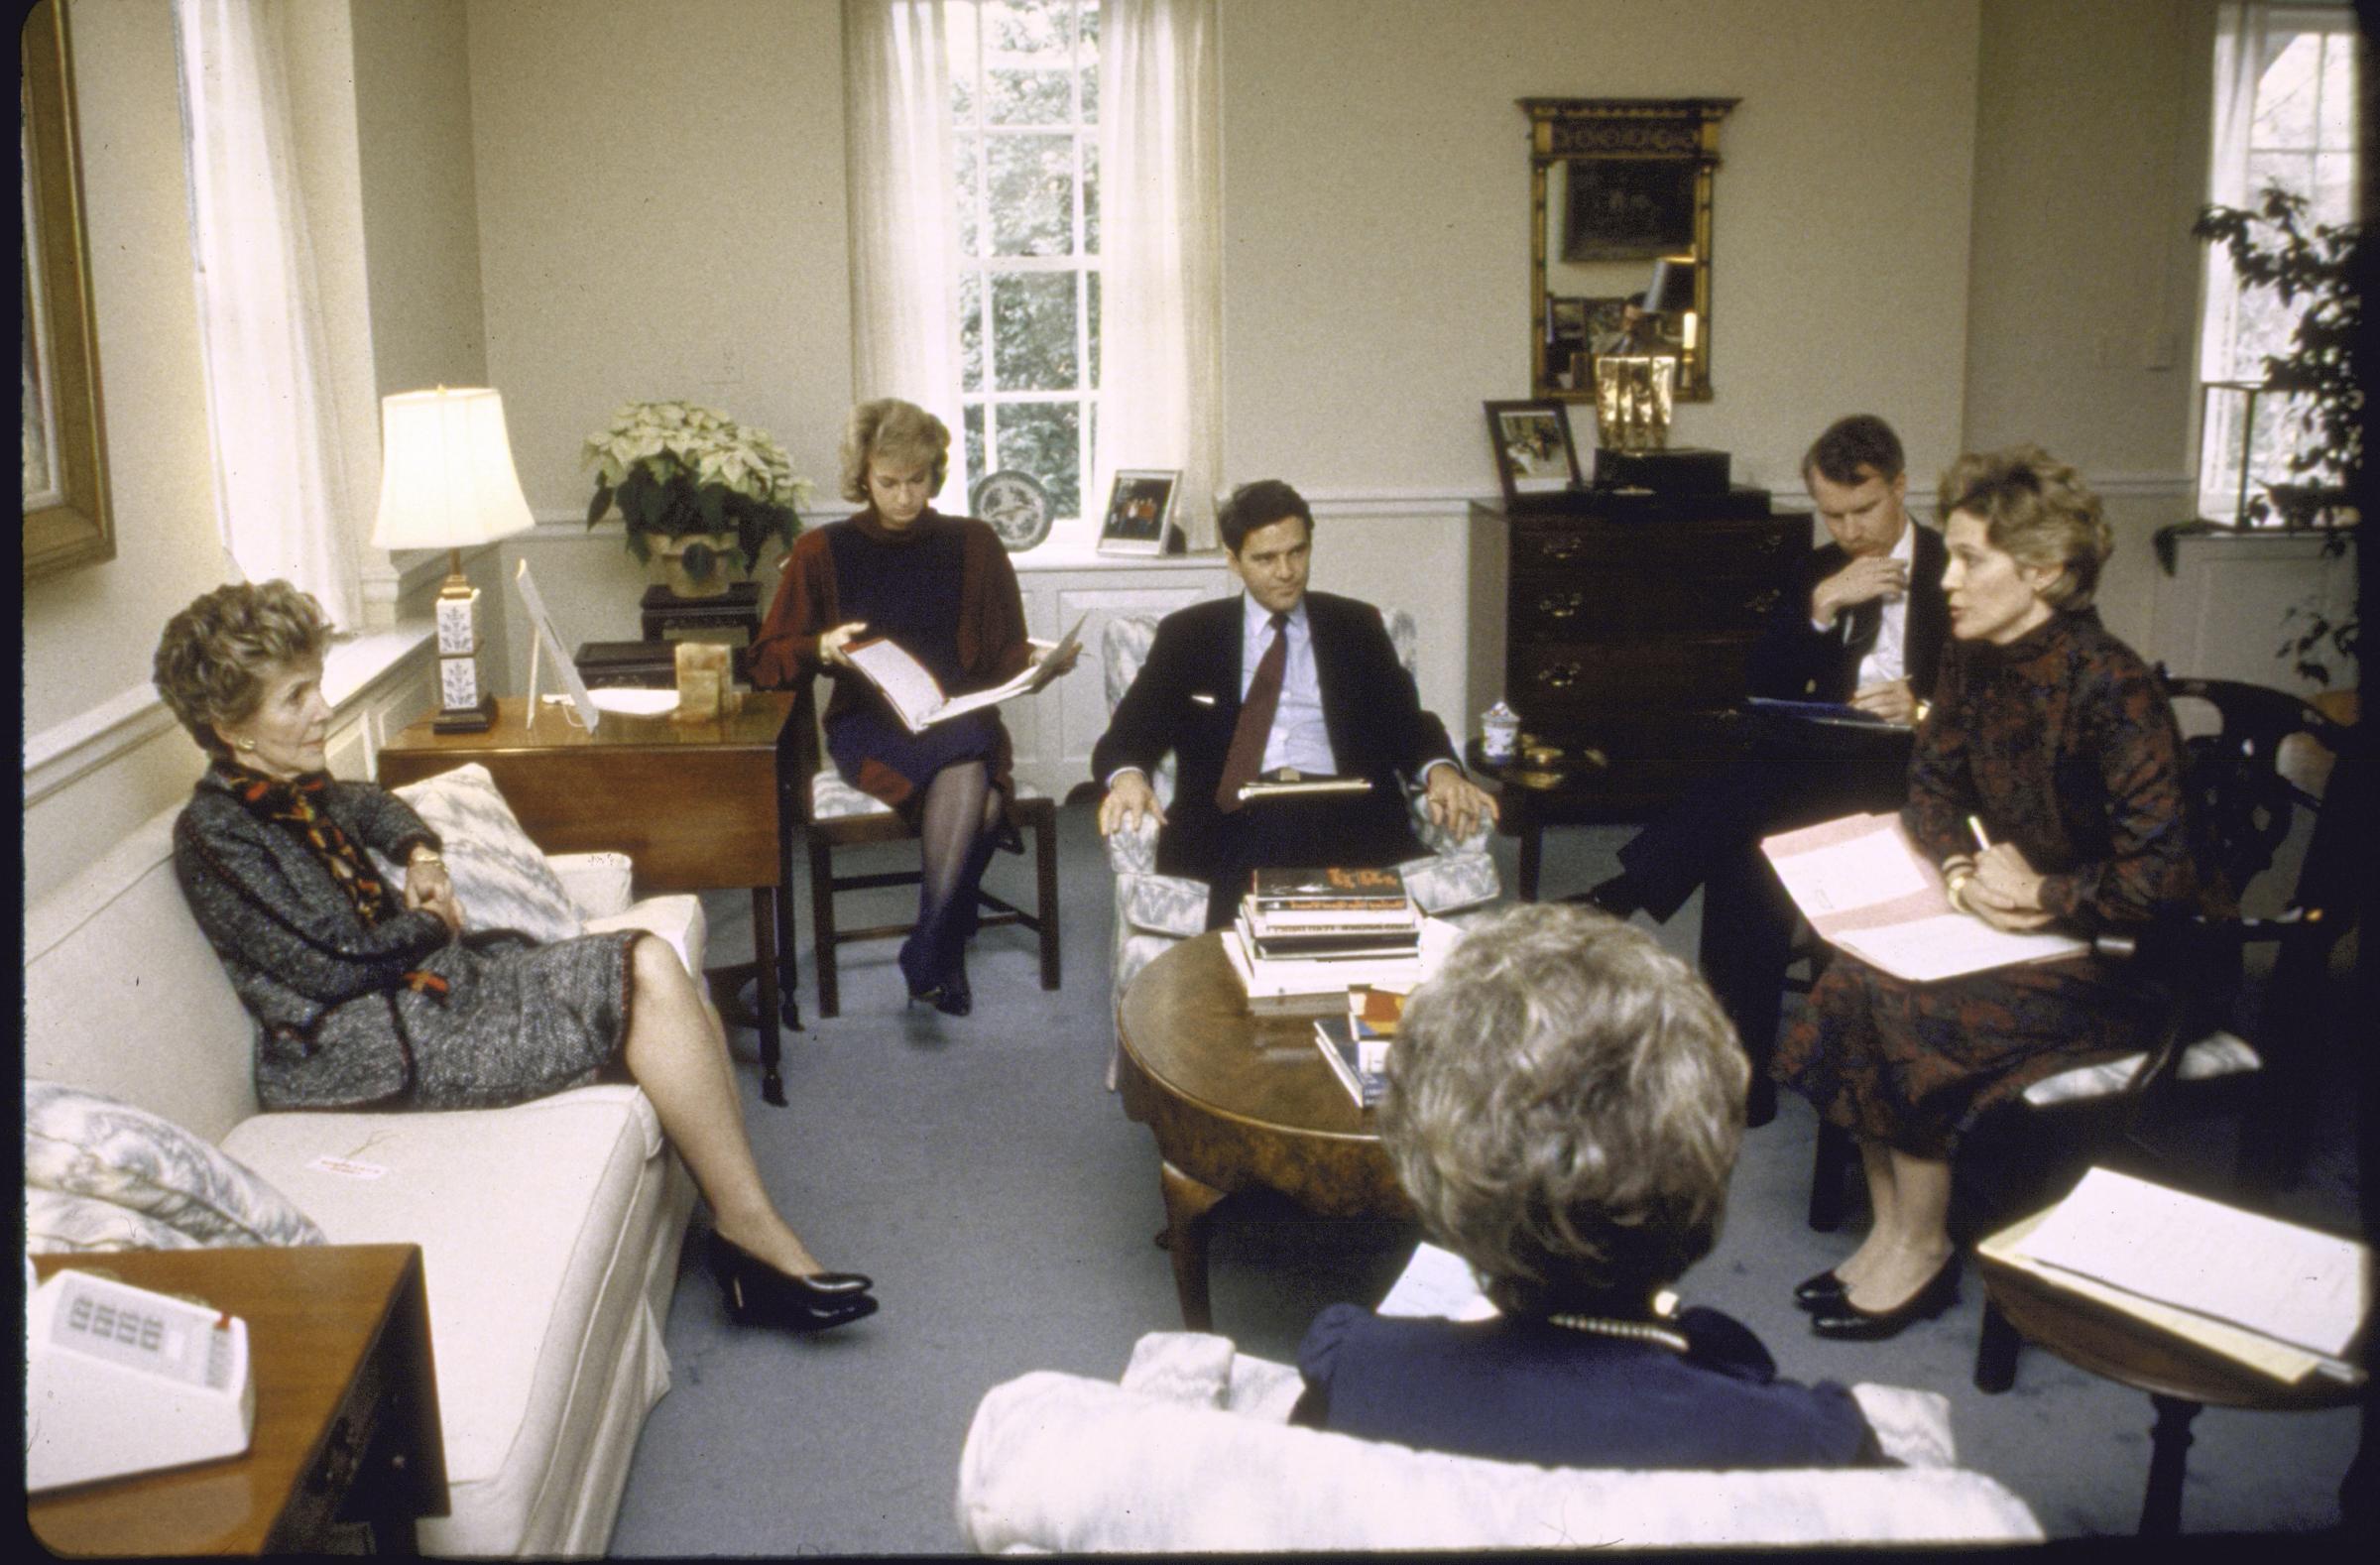 Second Term The First Lady meets with her staff in 1985. Nancy's primary iniative as First Lady was a program aimed at curbing drug abuse among young people christened the "Just Say No" drug awareness campaign.